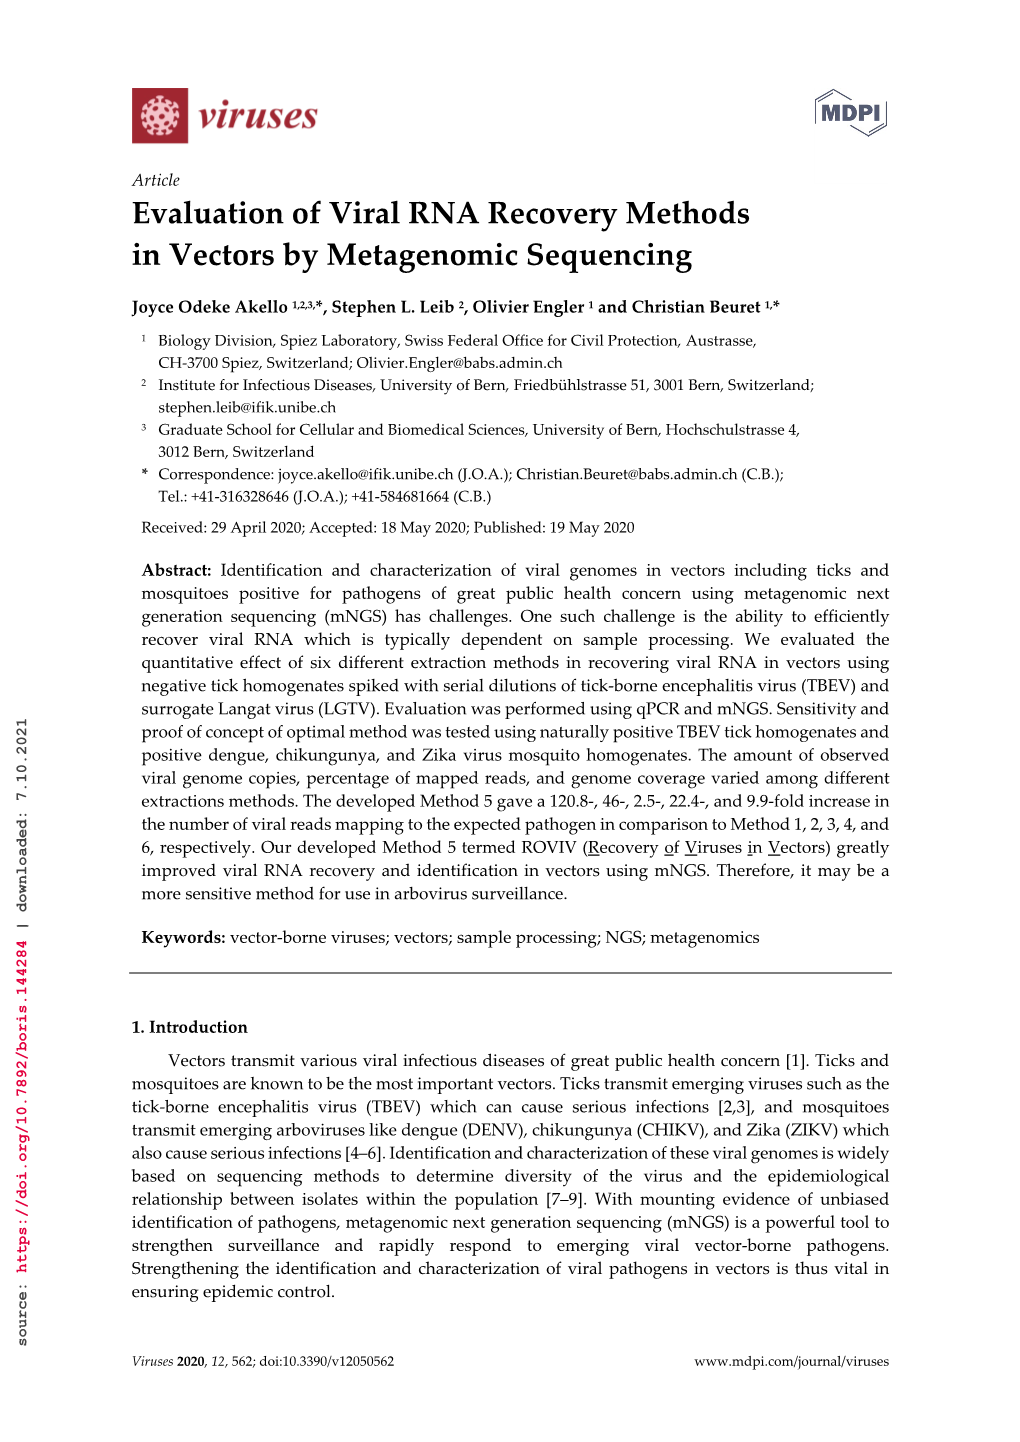 Evaluation of Viral RNA Recovery Methods in Vectors By